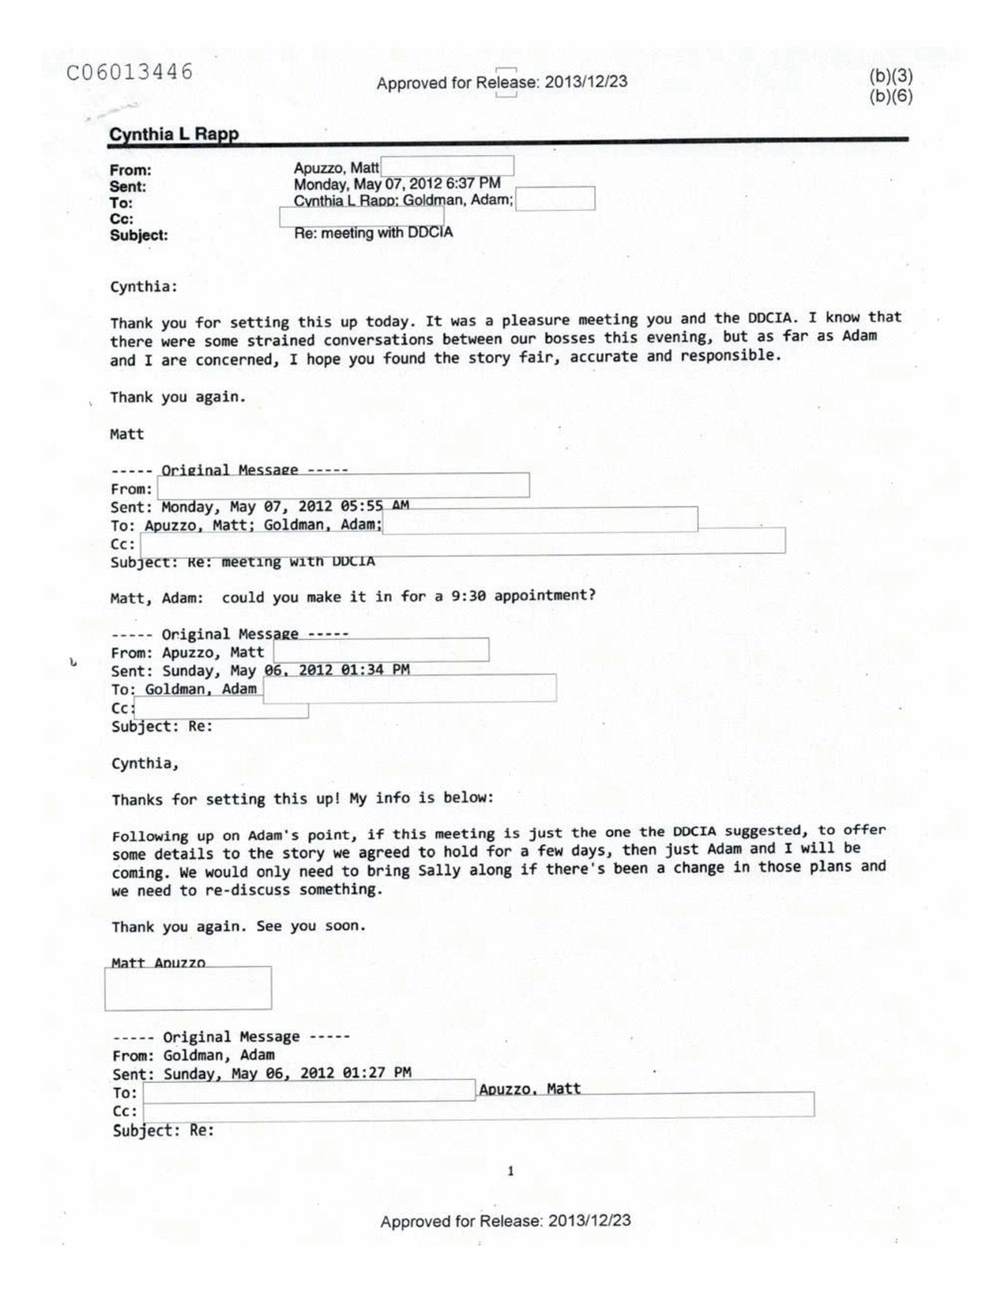 Page 308 from Email Correspondence Between Reporters and CIA Flacks